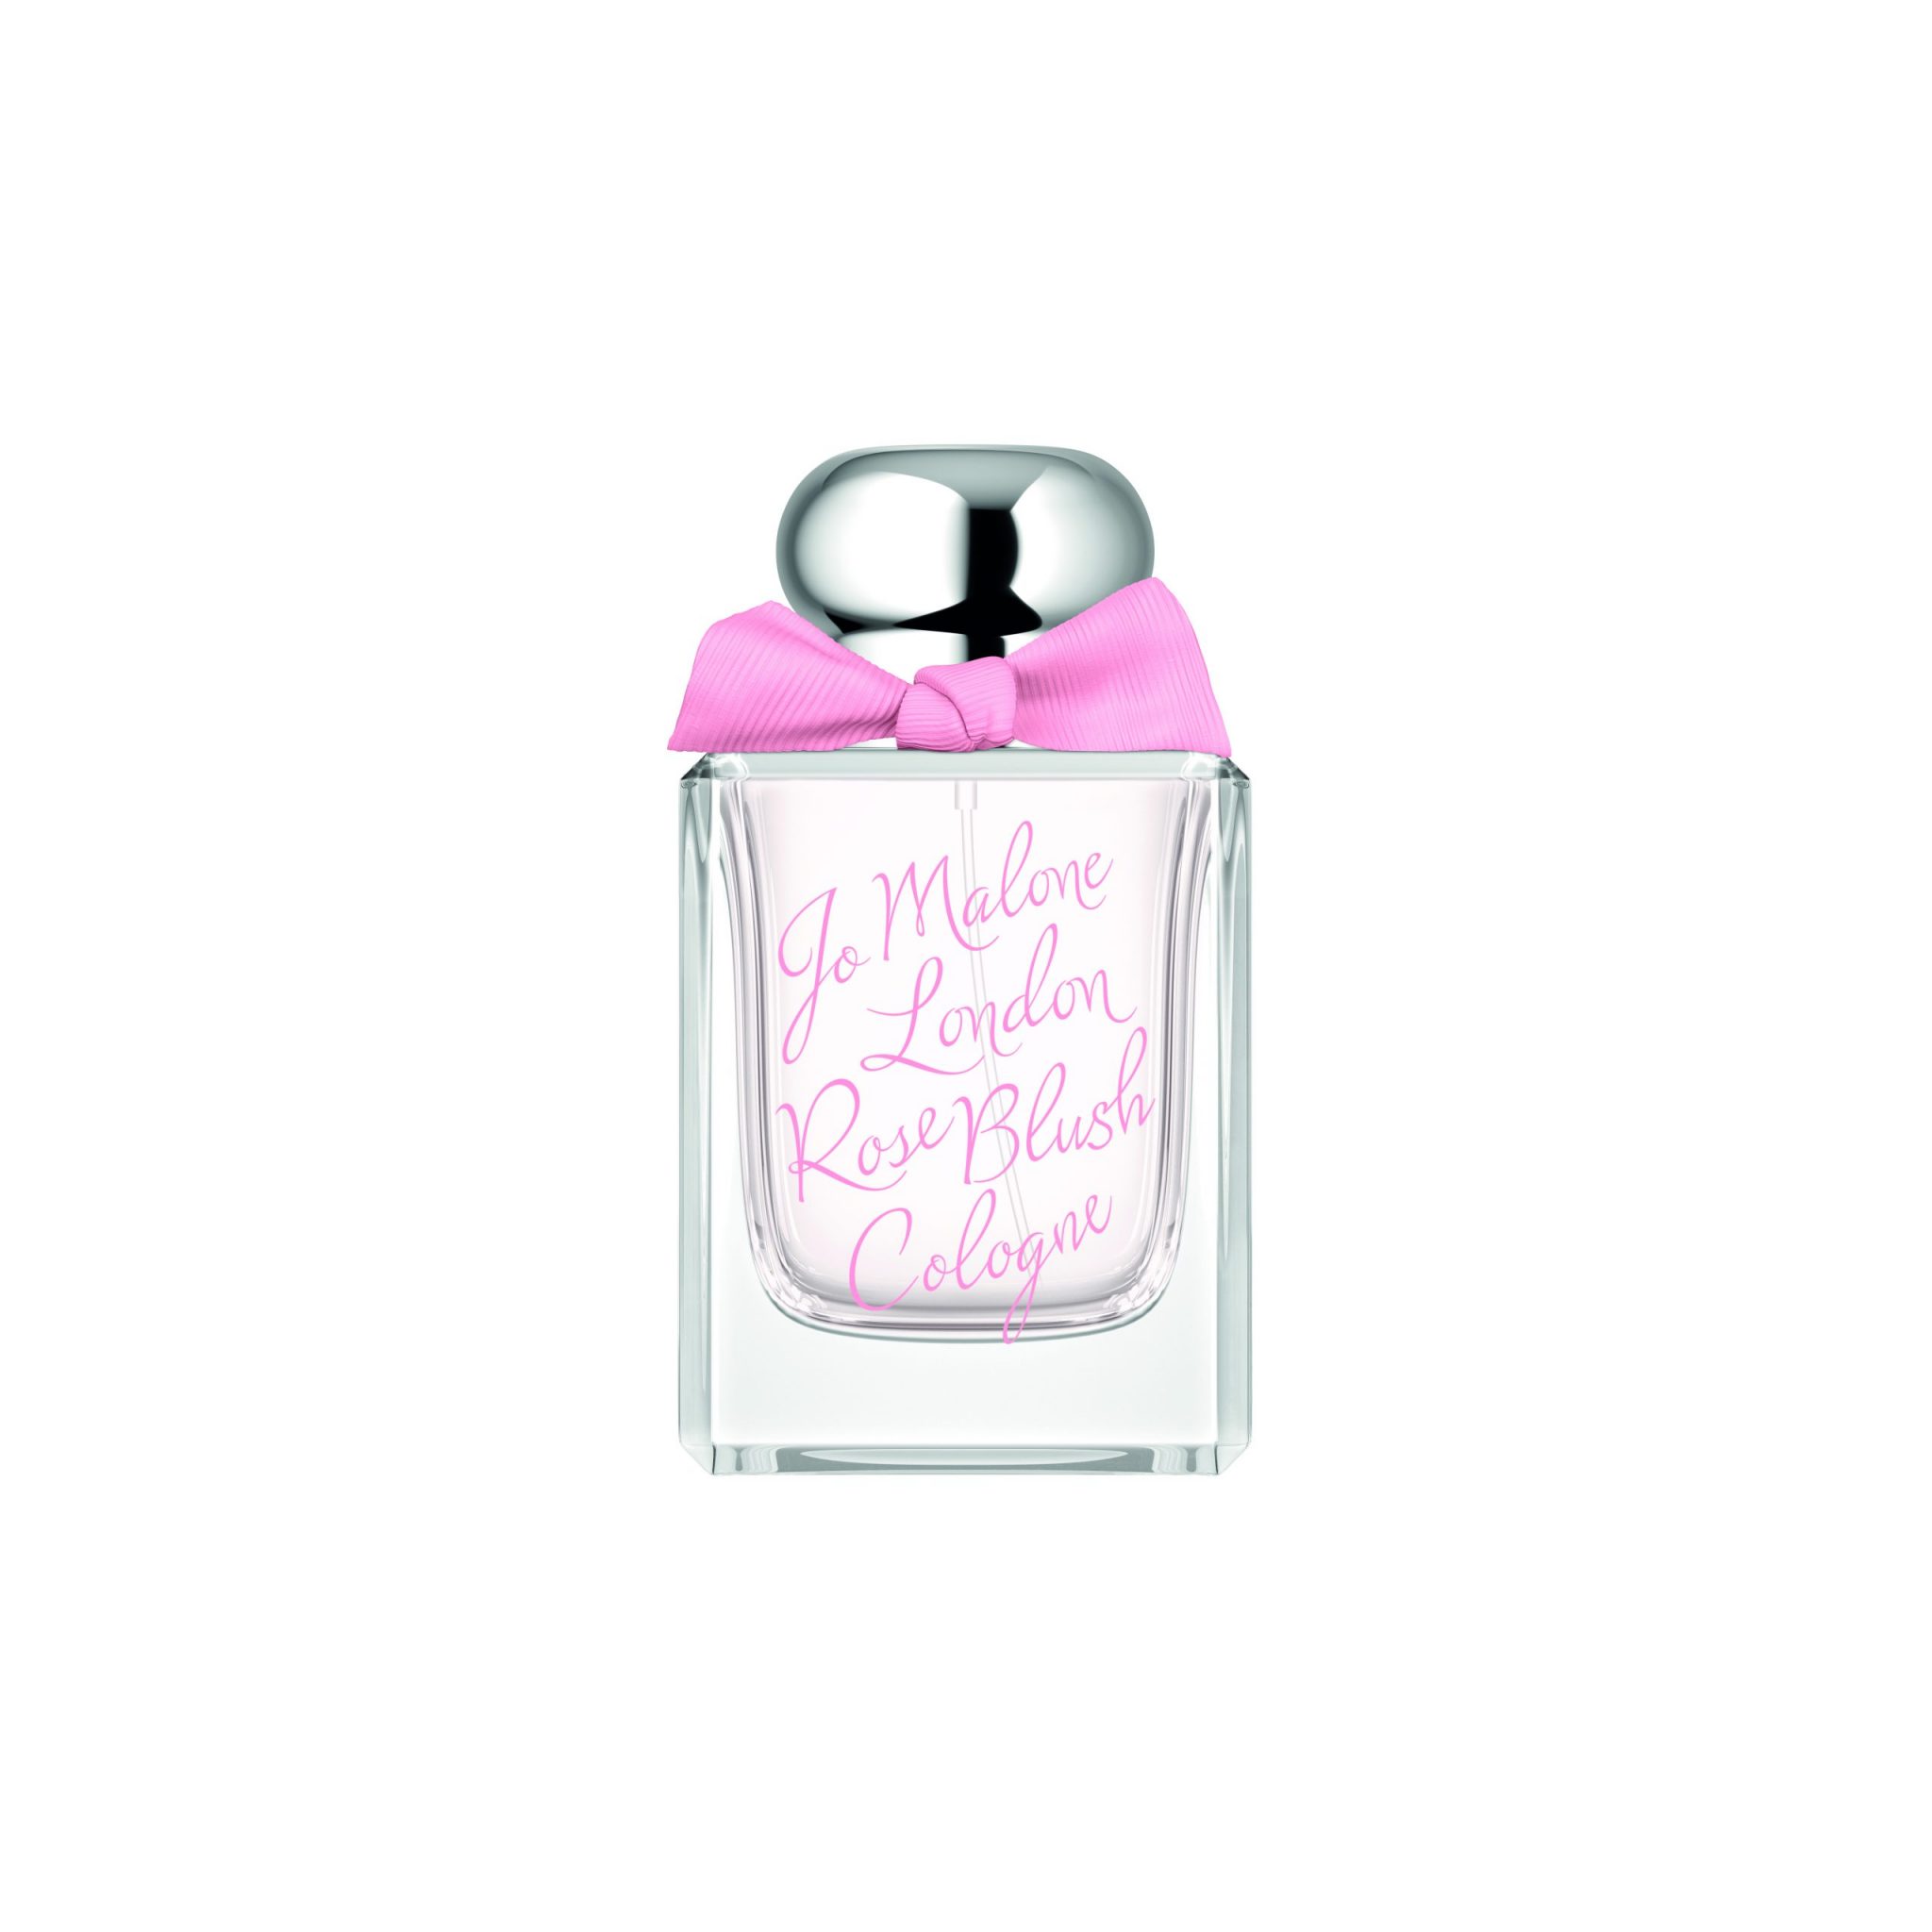 Cologne_50ml_Rose-Blush_Roses-Collection_PRINT_F39L_300